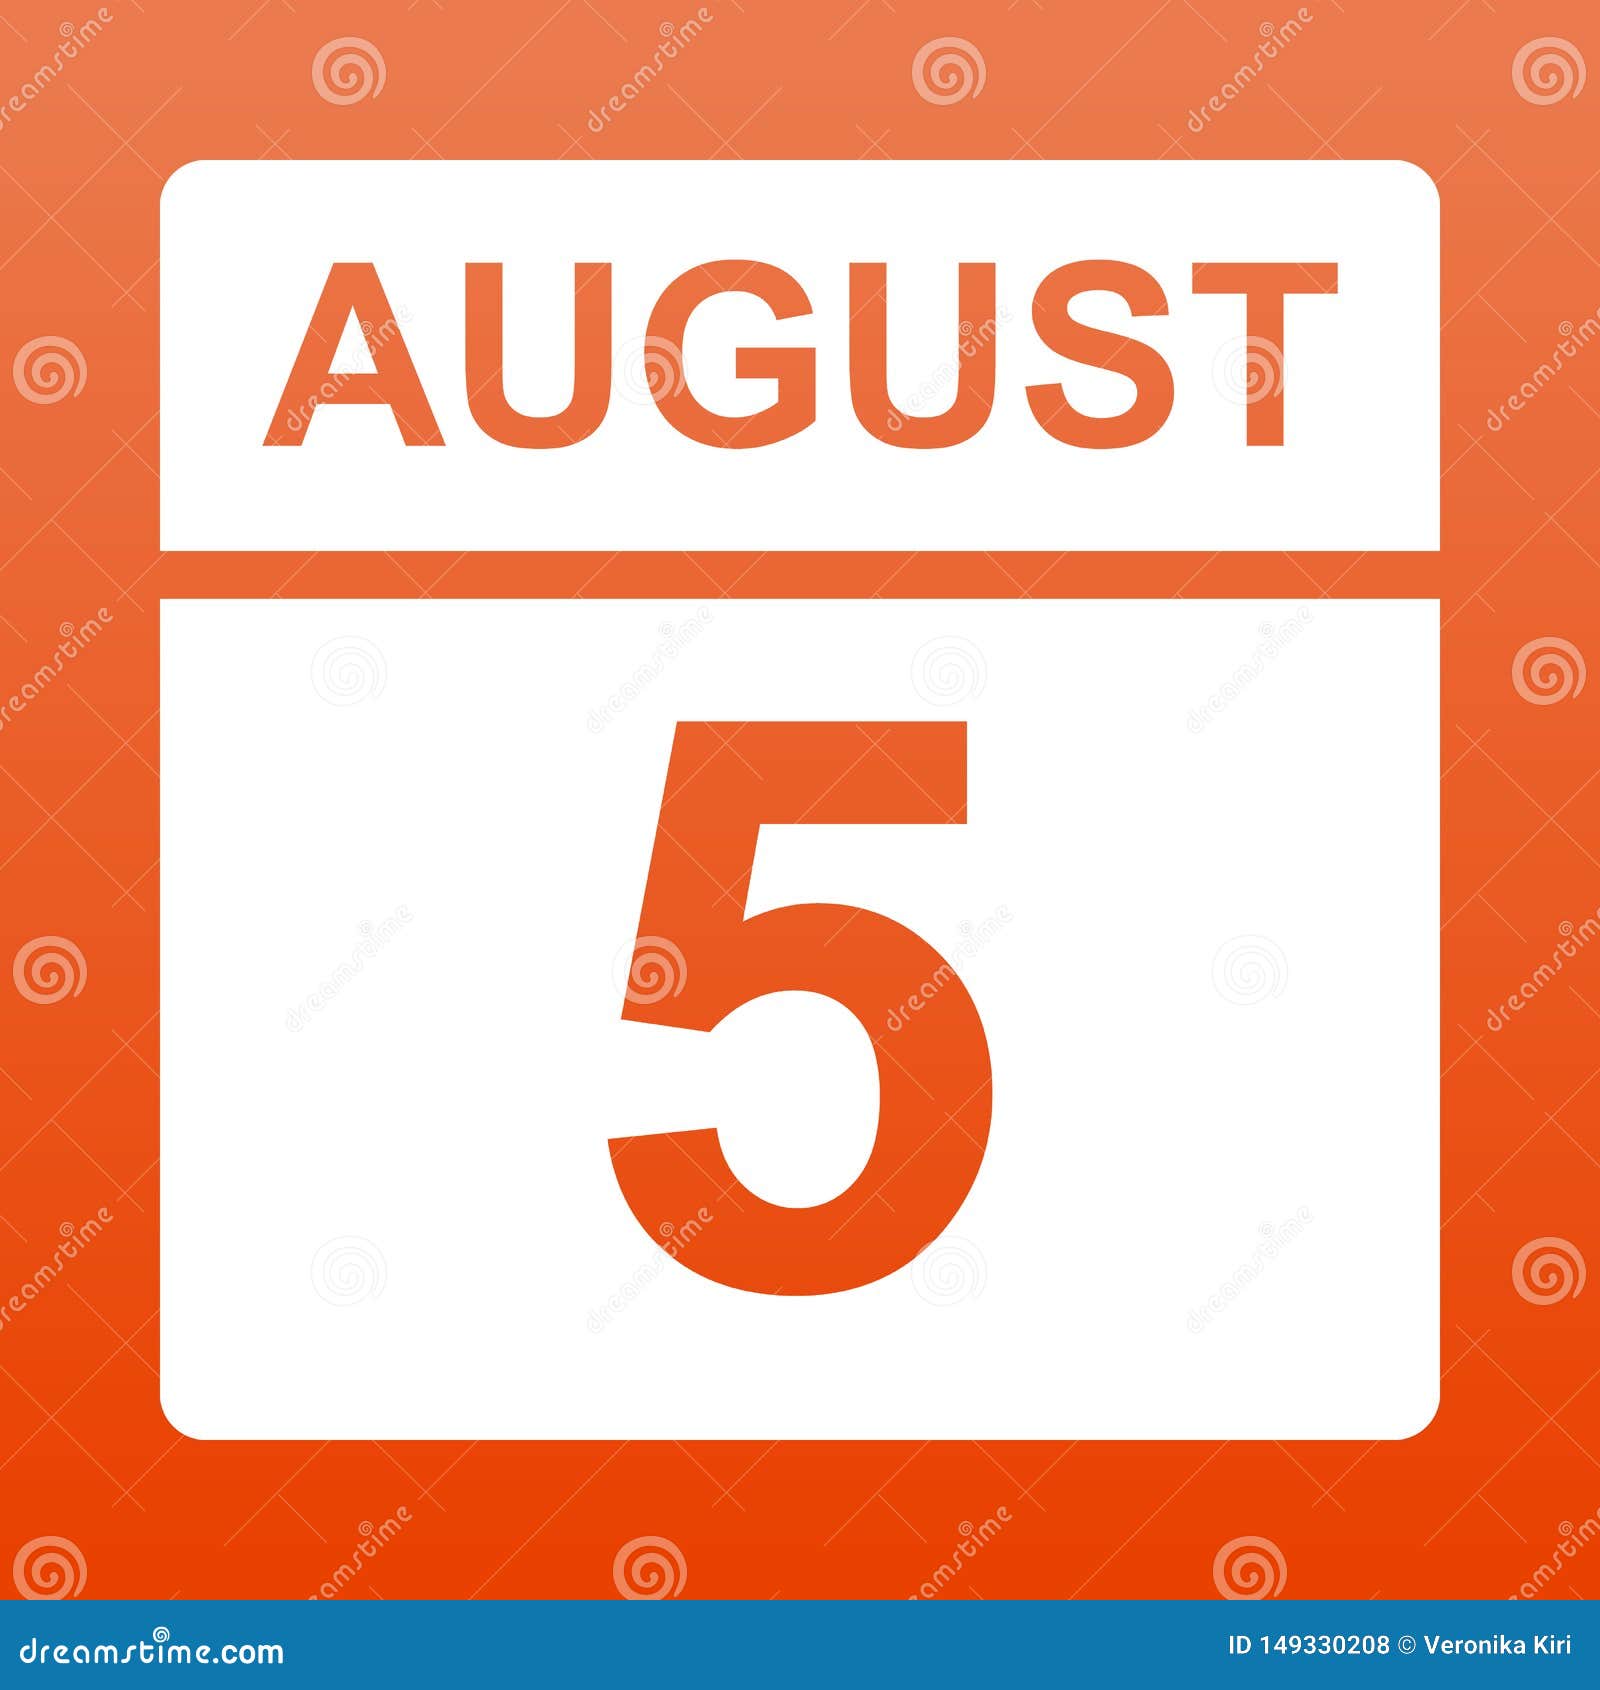 What is the element of August 5?